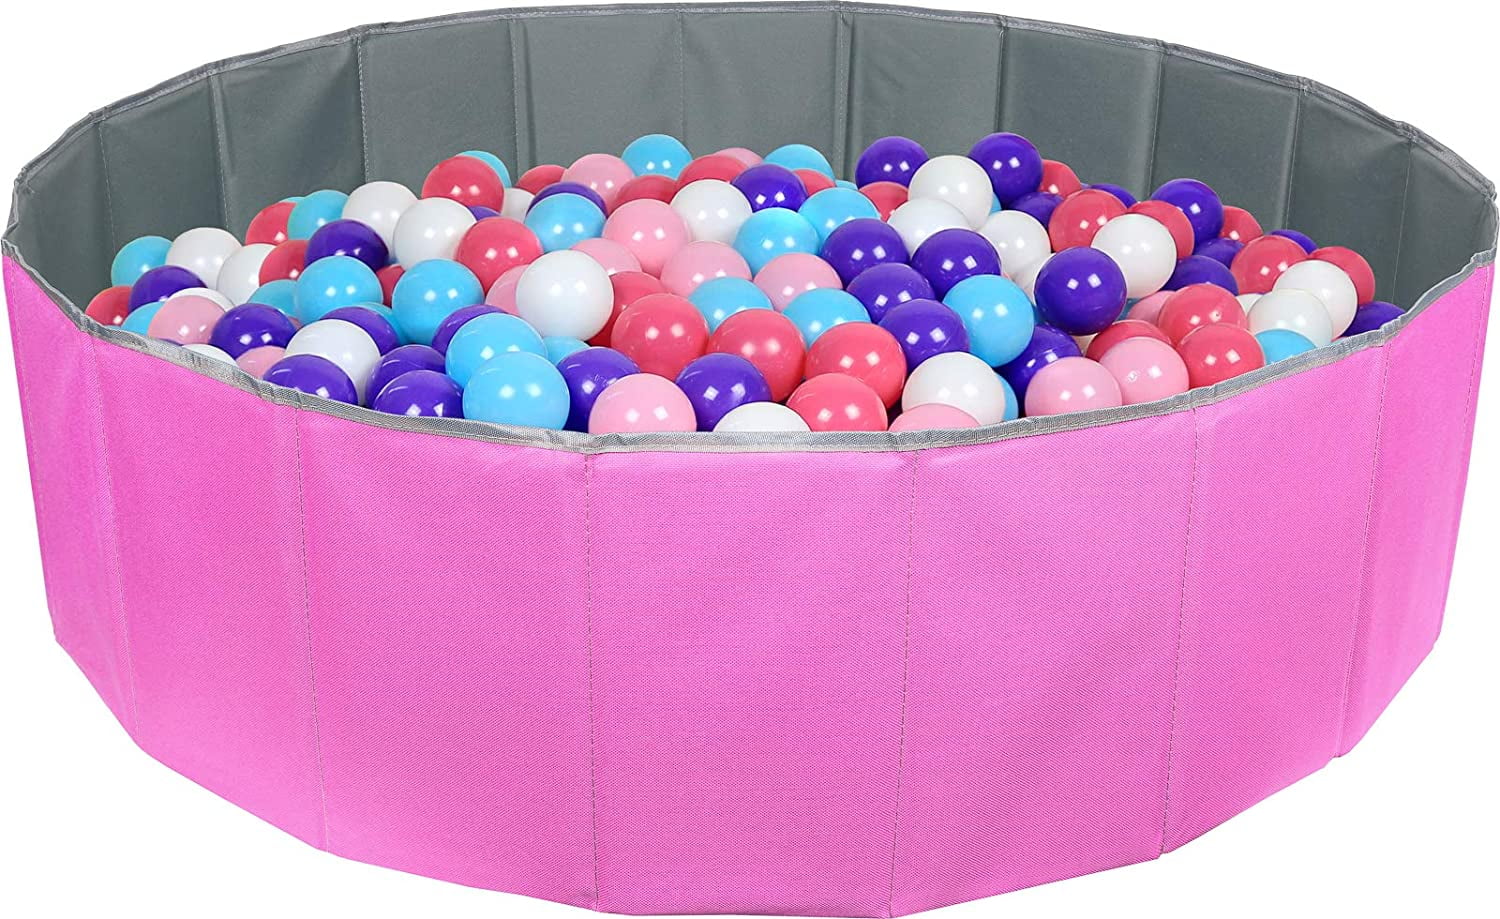 Soft Play Toddler Ballpit & Store bag. 